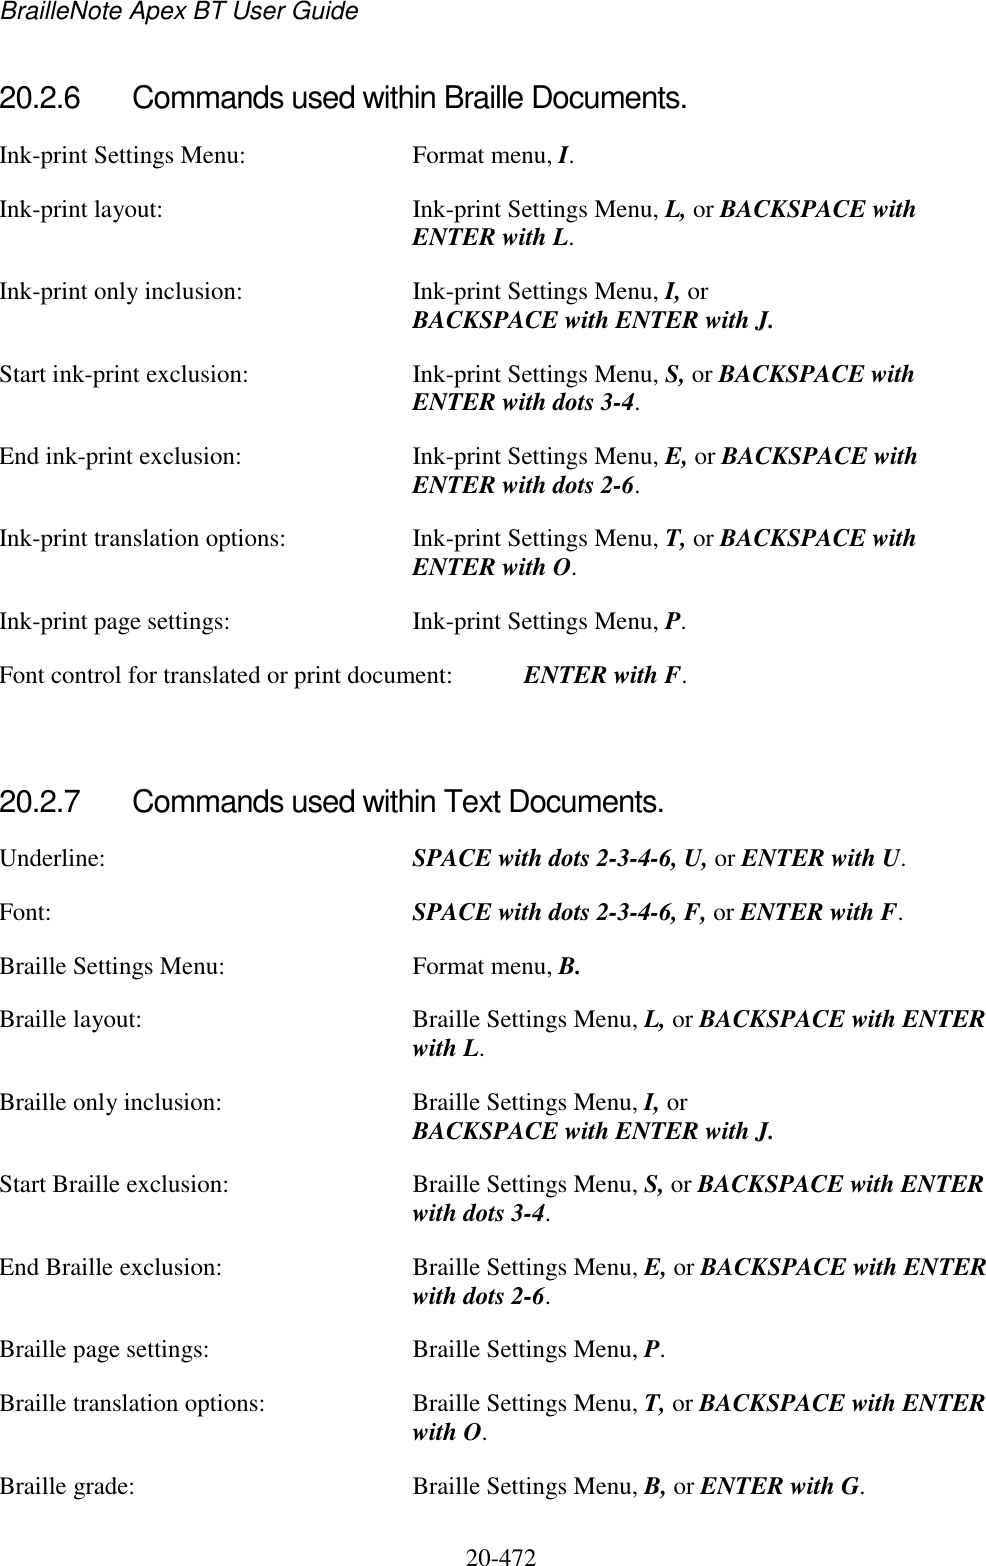 BrailleNote Apex BT User Guide   20-472   20.2.6  Commands used within Braille Documents. Ink-print Settings Menu:  Format menu, I. Ink-print layout:  Ink-print Settings Menu, L, or BACKSPACE with ENTER with L. Ink-print only inclusion:  Ink-print Settings Menu, I, or BACKSPACE with ENTER with J. Start ink-print exclusion:  Ink-print Settings Menu, S, or BACKSPACE with ENTER with dots 3-4. End ink-print exclusion:  Ink-print Settings Menu, E, or BACKSPACE with ENTER with dots 2-6. Ink-print translation options:  Ink-print Settings Menu, T, or BACKSPACE with ENTER with O. Ink-print page settings:  Ink-print Settings Menu, P. Font control for translated or print document:  ENTER with F.   20.2.7  Commands used within Text Documents. Underline:  SPACE with dots 2-3-4-6, U, or ENTER with U. Font:  SPACE with dots 2-3-4-6, F, or ENTER with F. Braille Settings Menu:  Format menu, B. Braille layout:  Braille Settings Menu, L, or BACKSPACE with ENTER with L. Braille only inclusion:  Braille Settings Menu, I, or BACKSPACE with ENTER with J. Start Braille exclusion:  Braille Settings Menu, S, or BACKSPACE with ENTER with dots 3-4. End Braille exclusion:  Braille Settings Menu, E, or BACKSPACE with ENTER with dots 2-6. Braille page settings:  Braille Settings Menu, P. Braille translation options:  Braille Settings Menu, T, or BACKSPACE with ENTER with O. Braille grade:   Braille Settings Menu, B, or ENTER with G.  